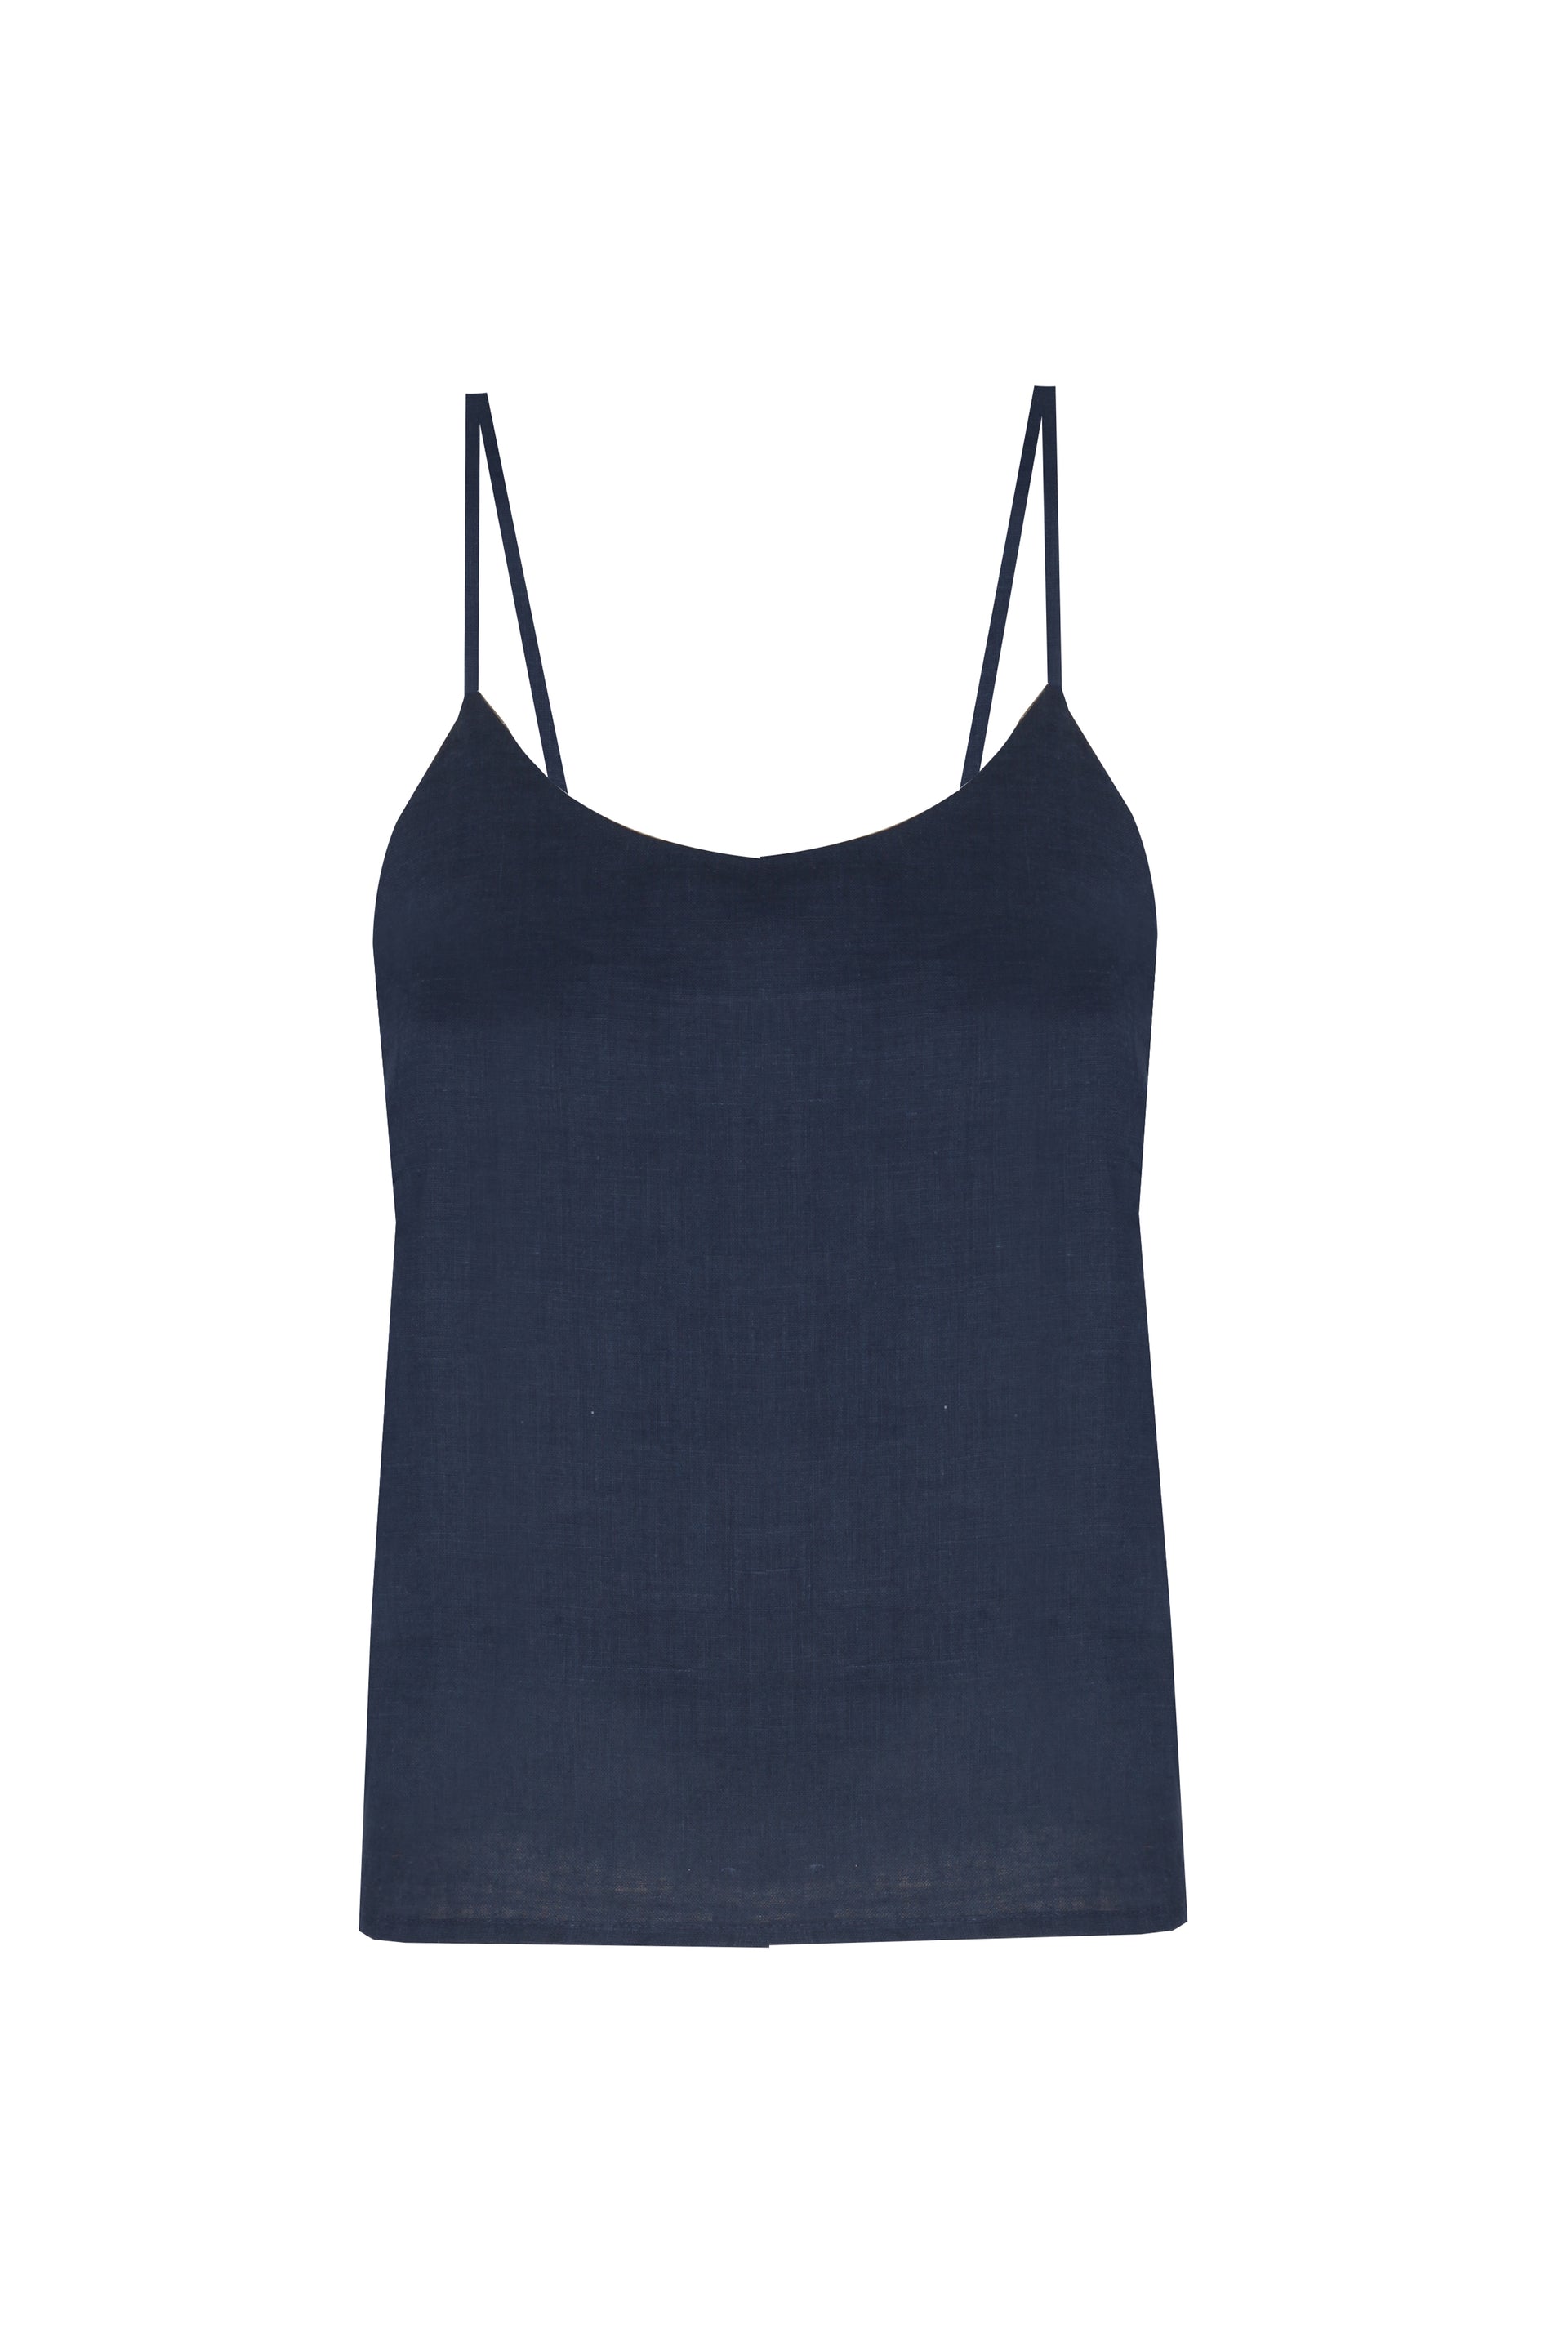 Linen Raw Hem Cami Top - Our Second Nature